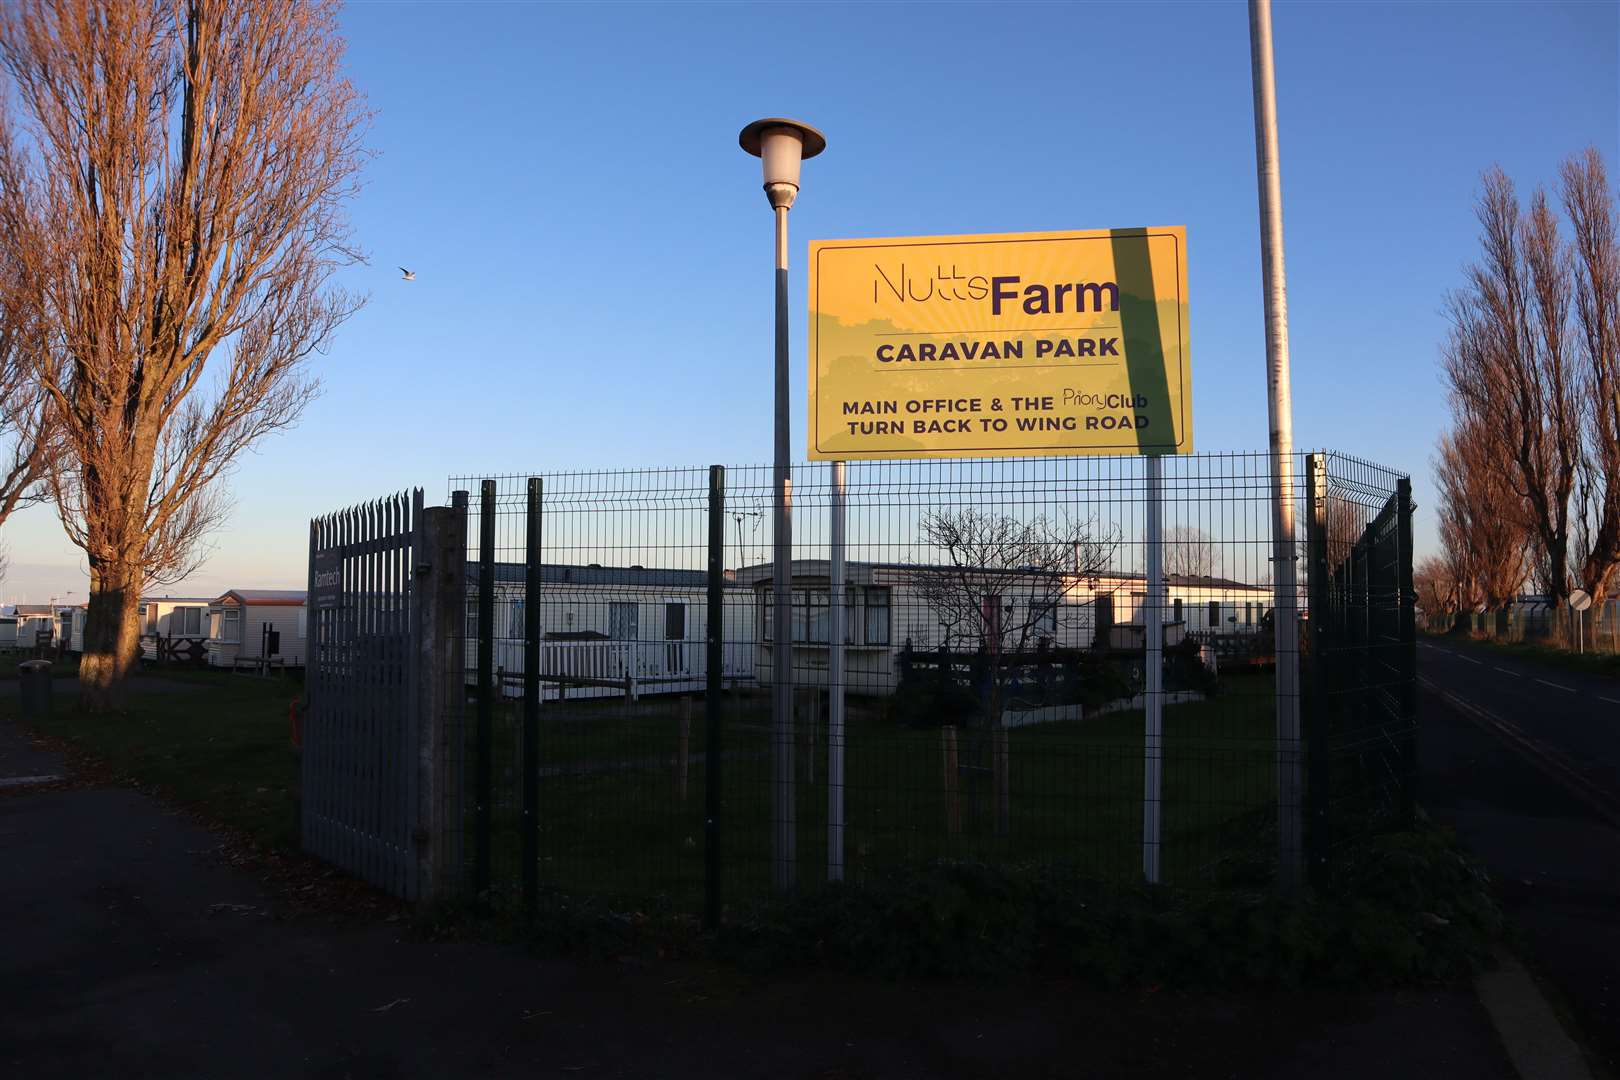 Nutts Farm caravan park in Leysdown, Sheppey, where Liverpool and England footballer Jamie Redknapp stayed as a youngster